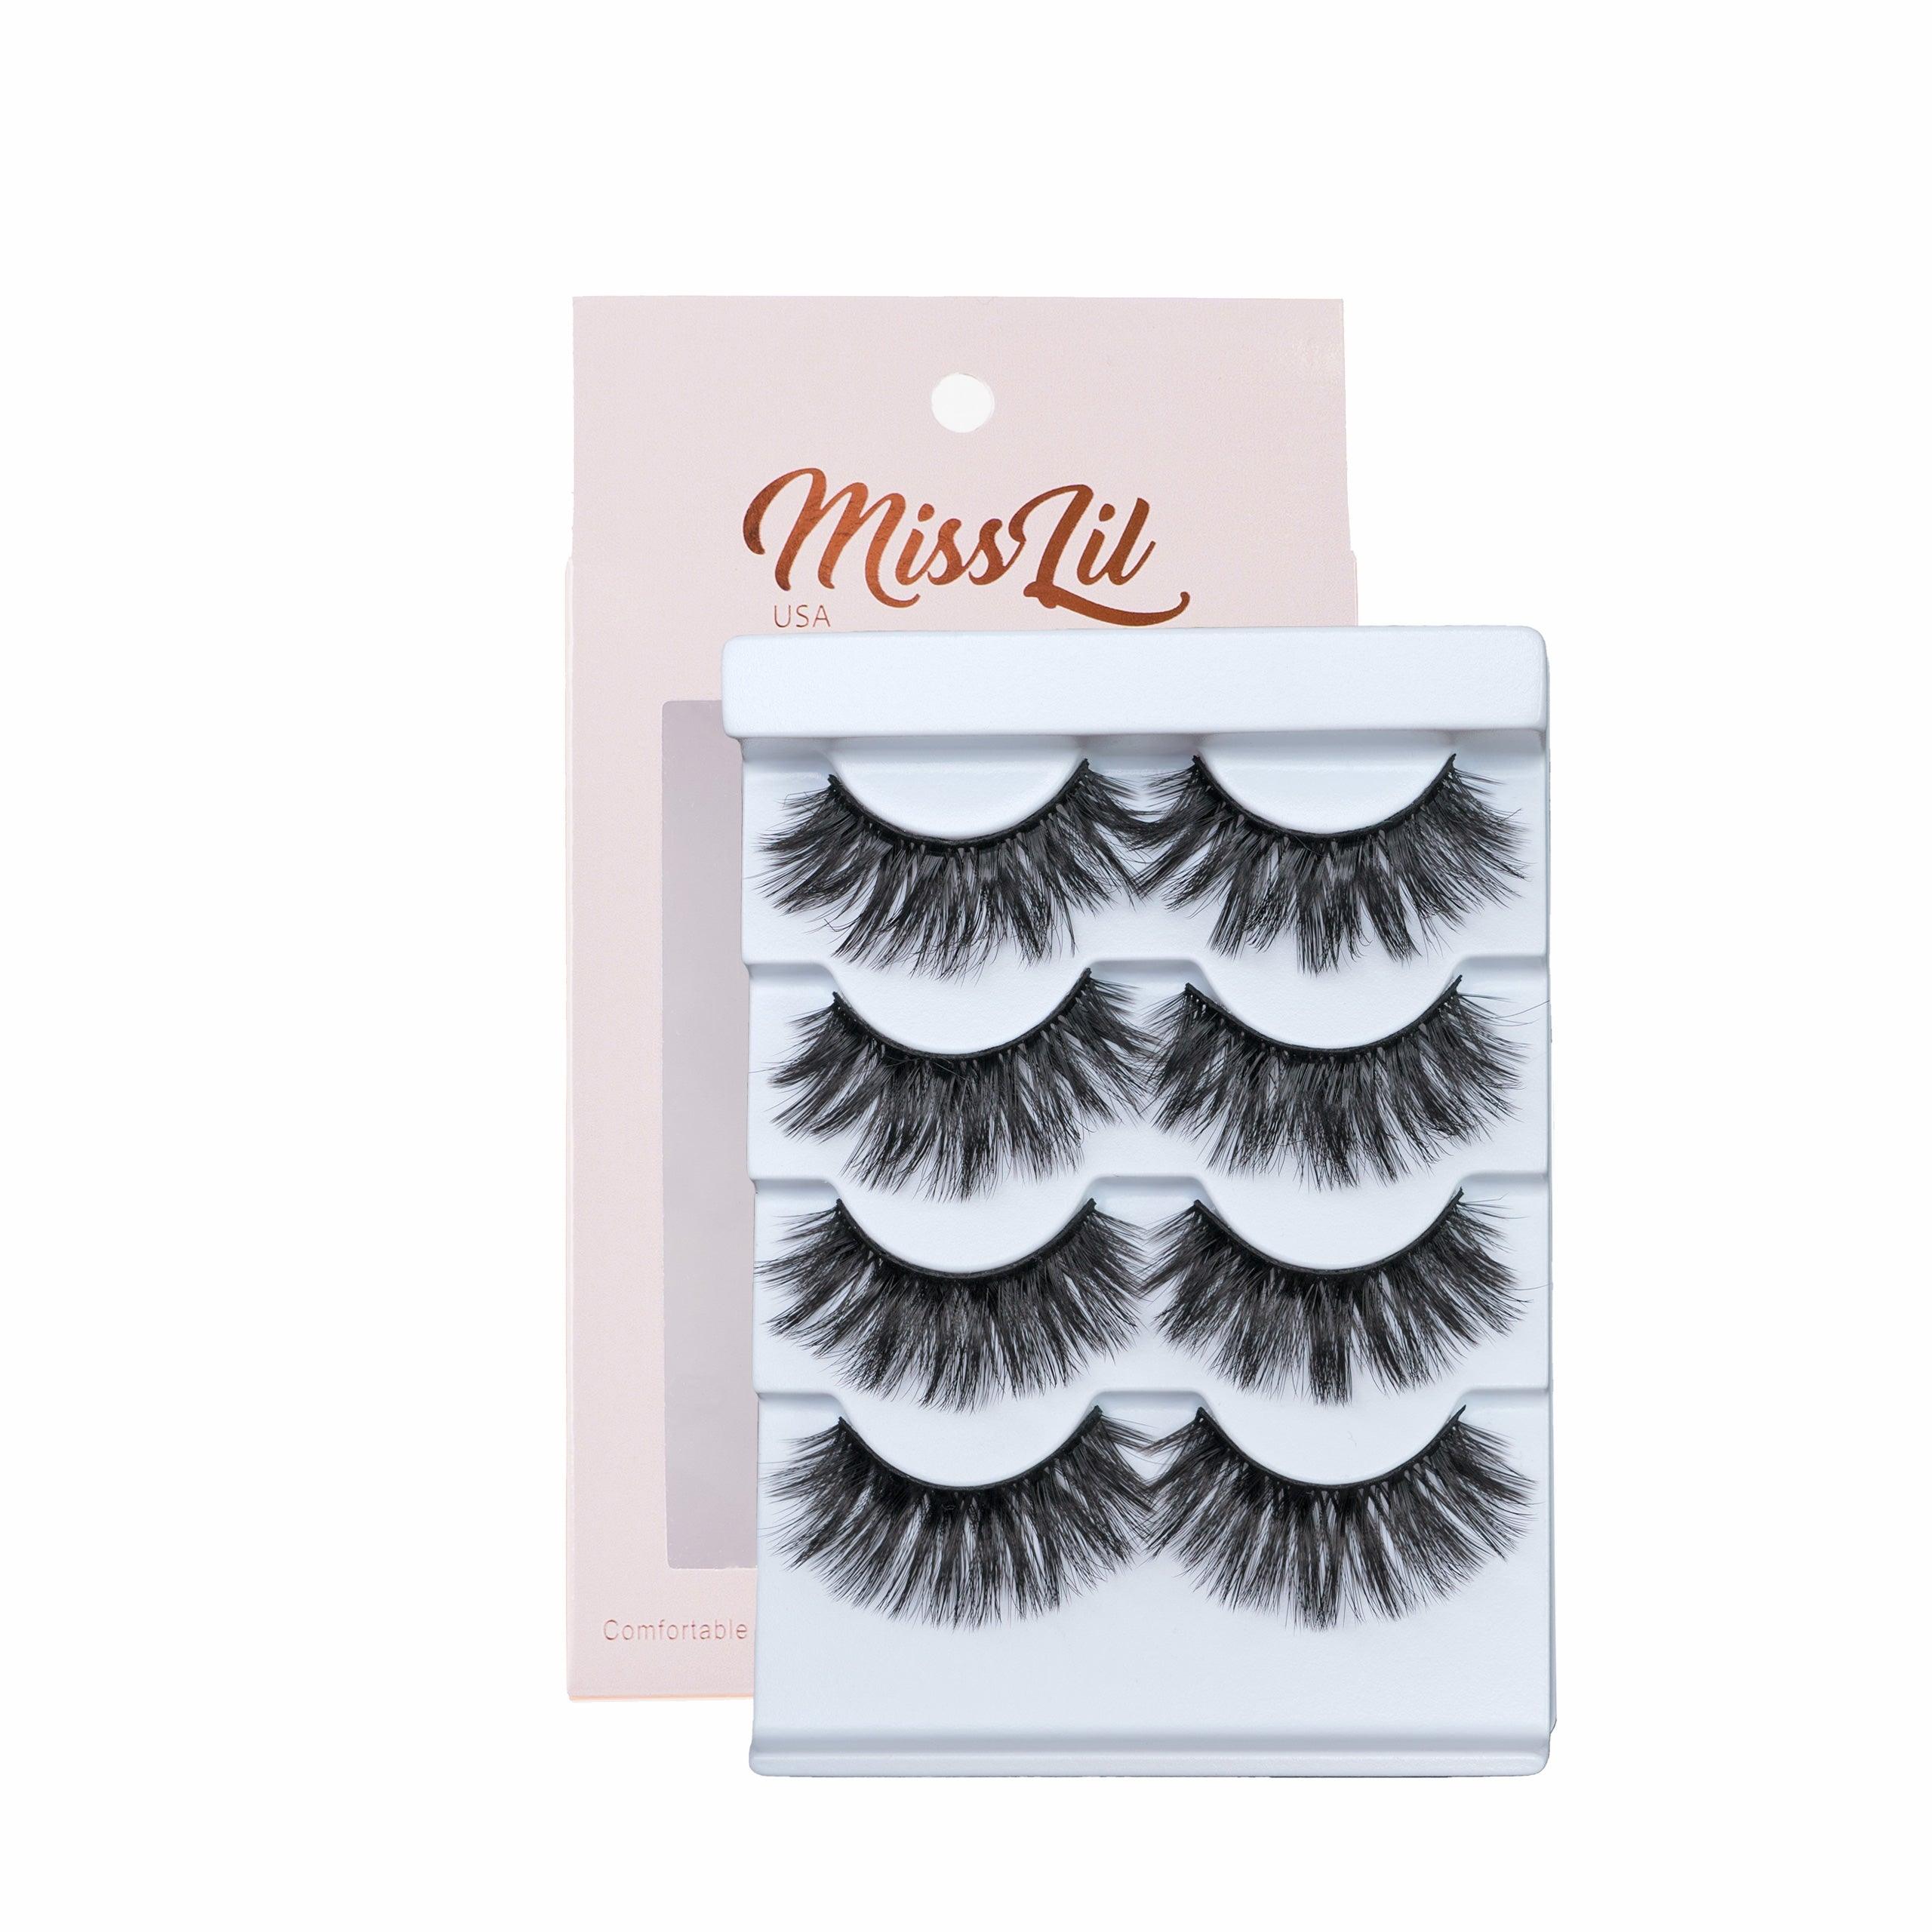 4 Pairs Lashes - Classic Collection #10 - Miss Lil USA